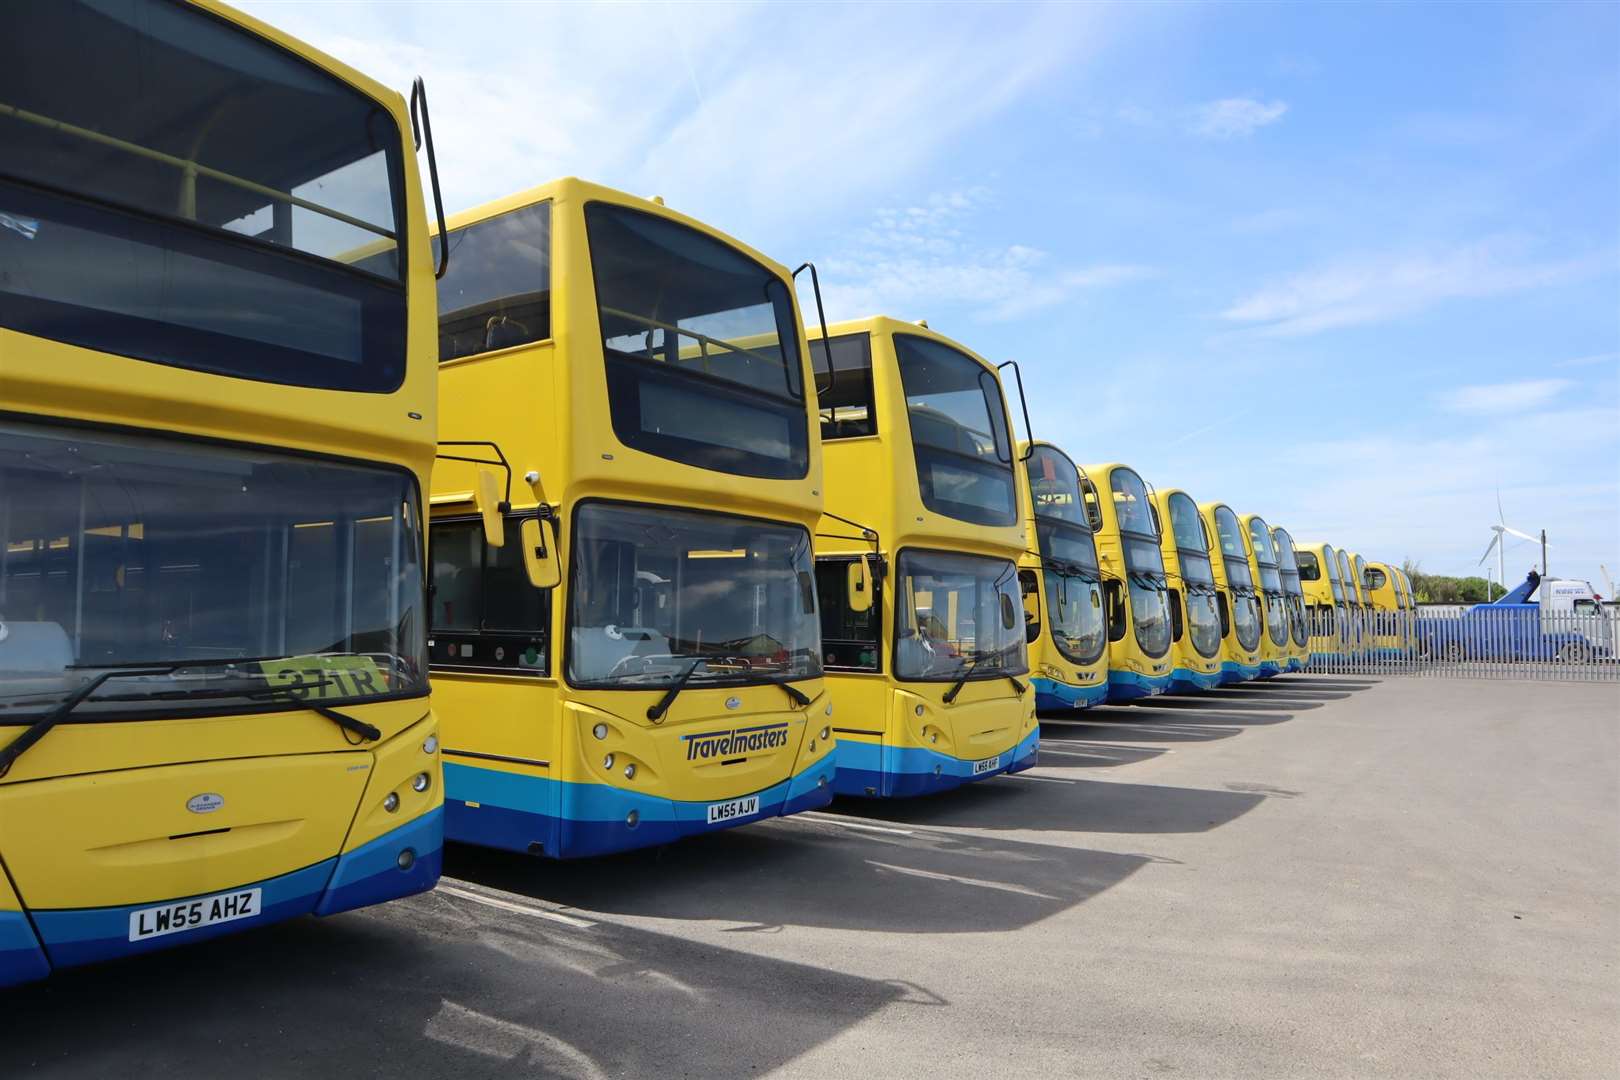 Fleet of TravelMasters buses based at Sheerness used to take Sheppey secondary school pupils to Sittingbourne schools every day